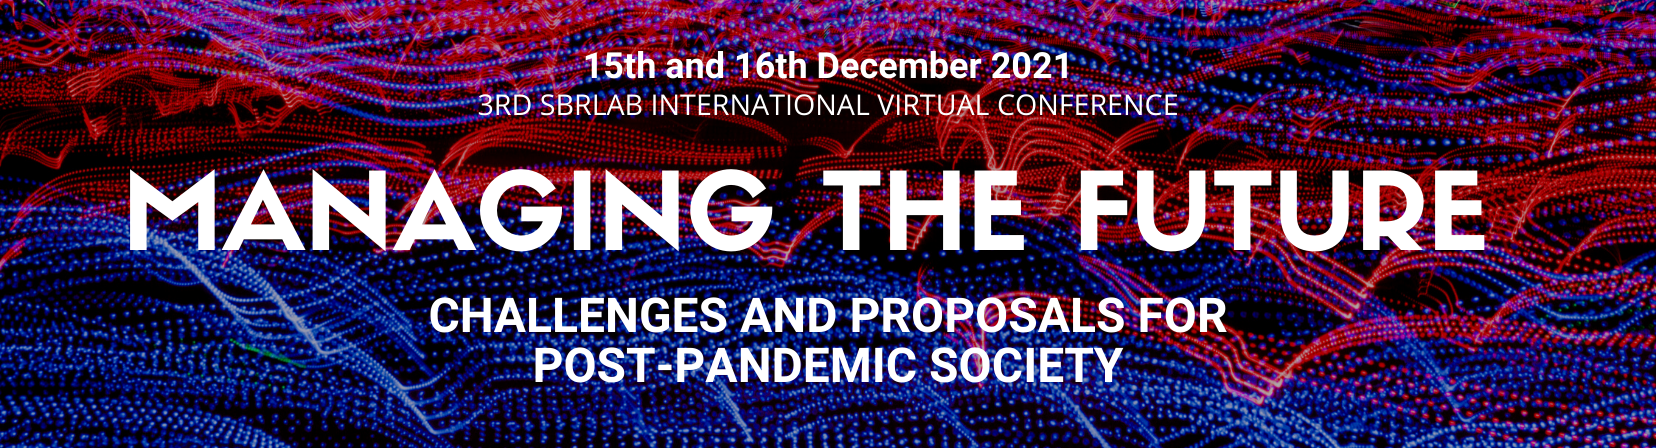 3rd SBRLAB International virtual Conference. Managing the future. Challenges and proposals for post-pandemic society